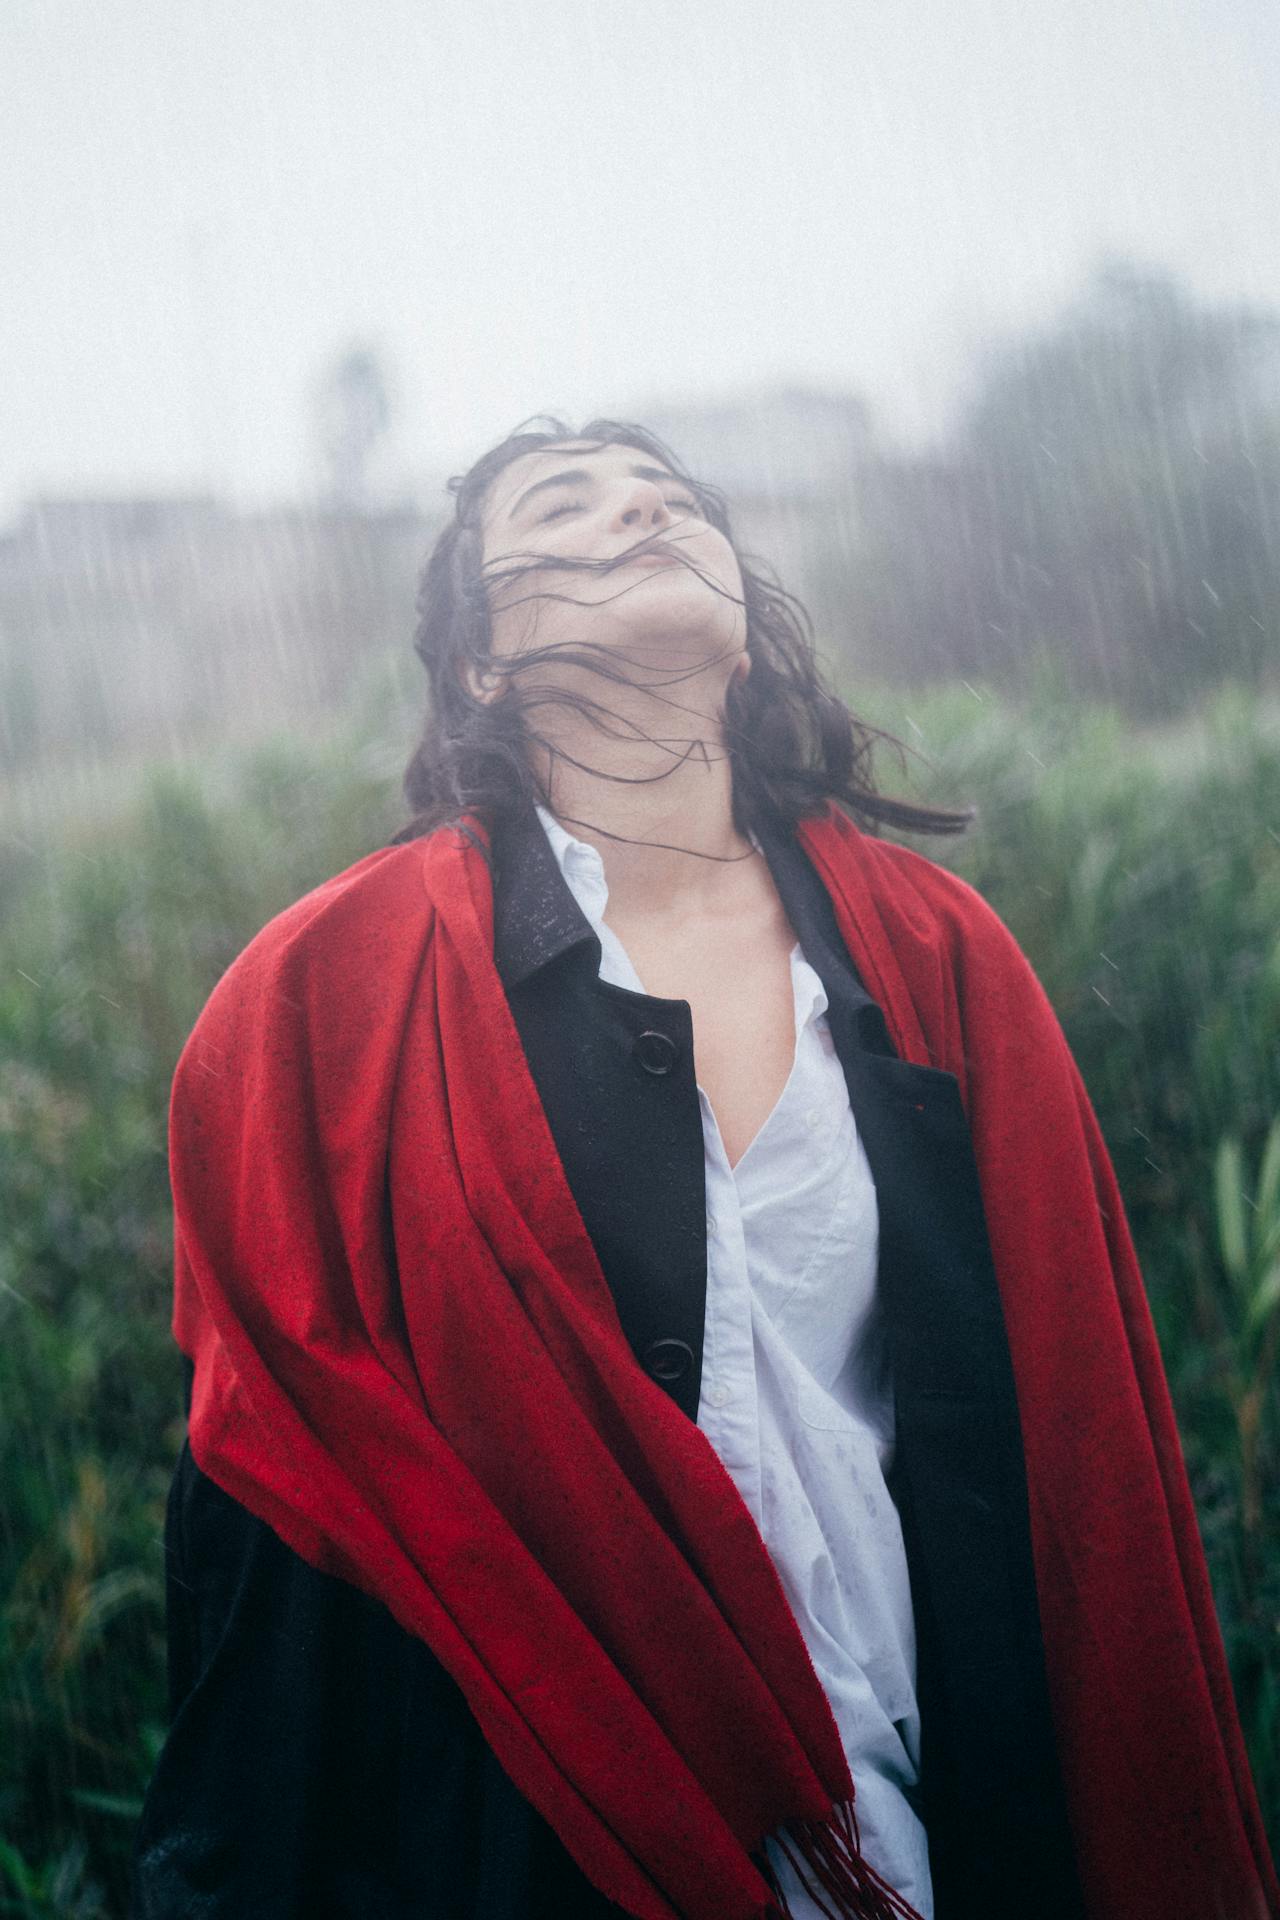 A light skinned woman with medium brown hair stands in the rain, wearing a red coat. Her face is turned upwards and her eyes are closed.